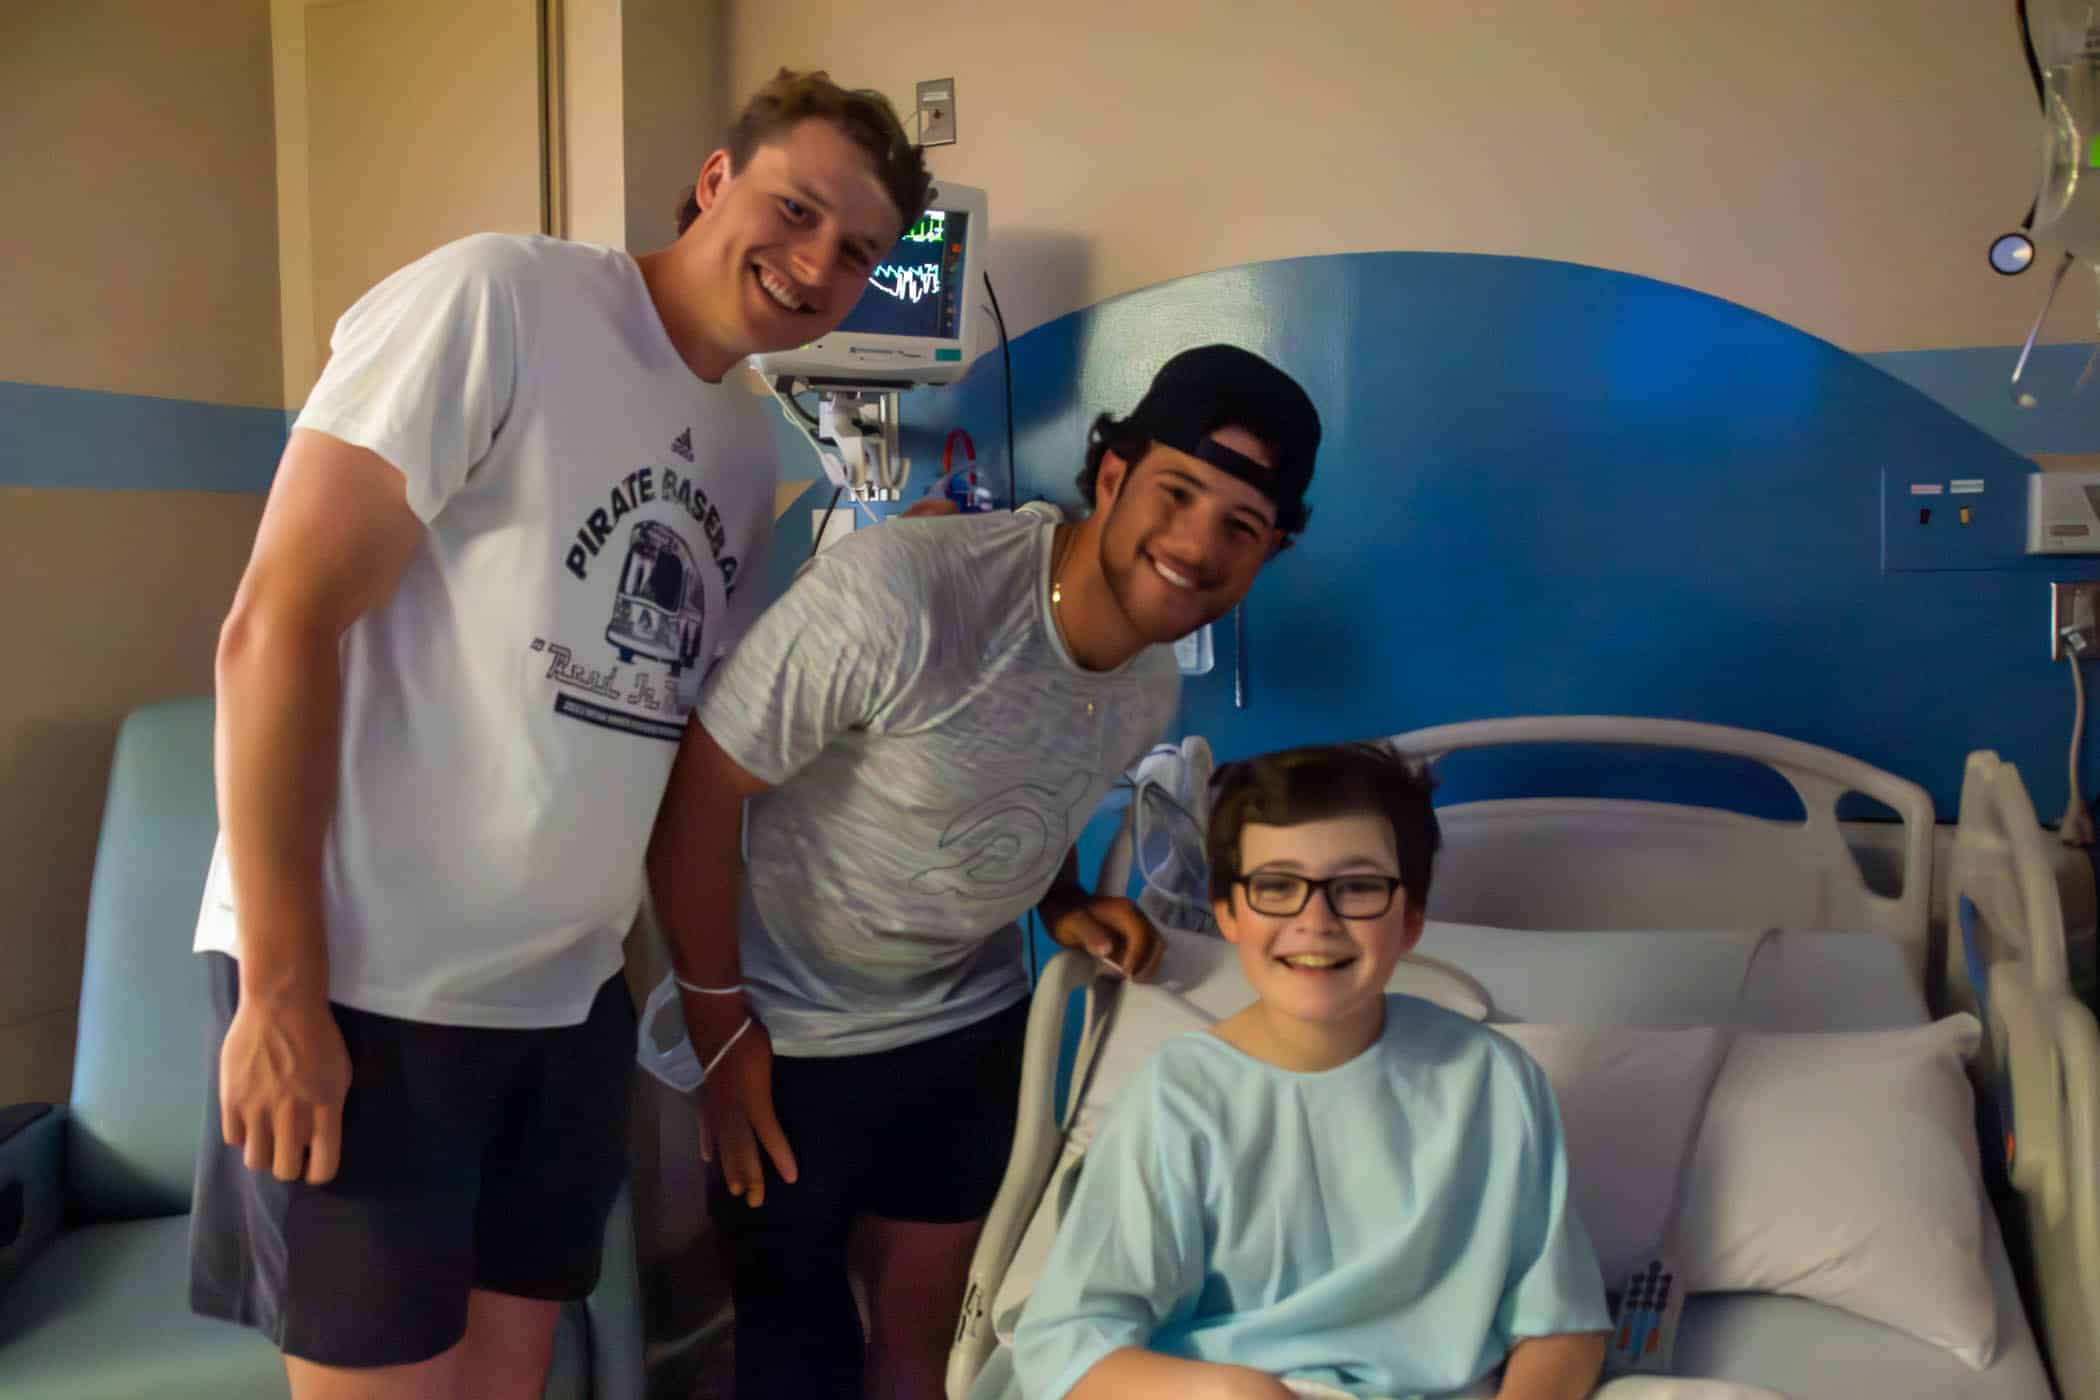 ECU baseball players Carter Cunningham and Parker Byrd visit with a pediatric patient at Maynard Children's Hospital.